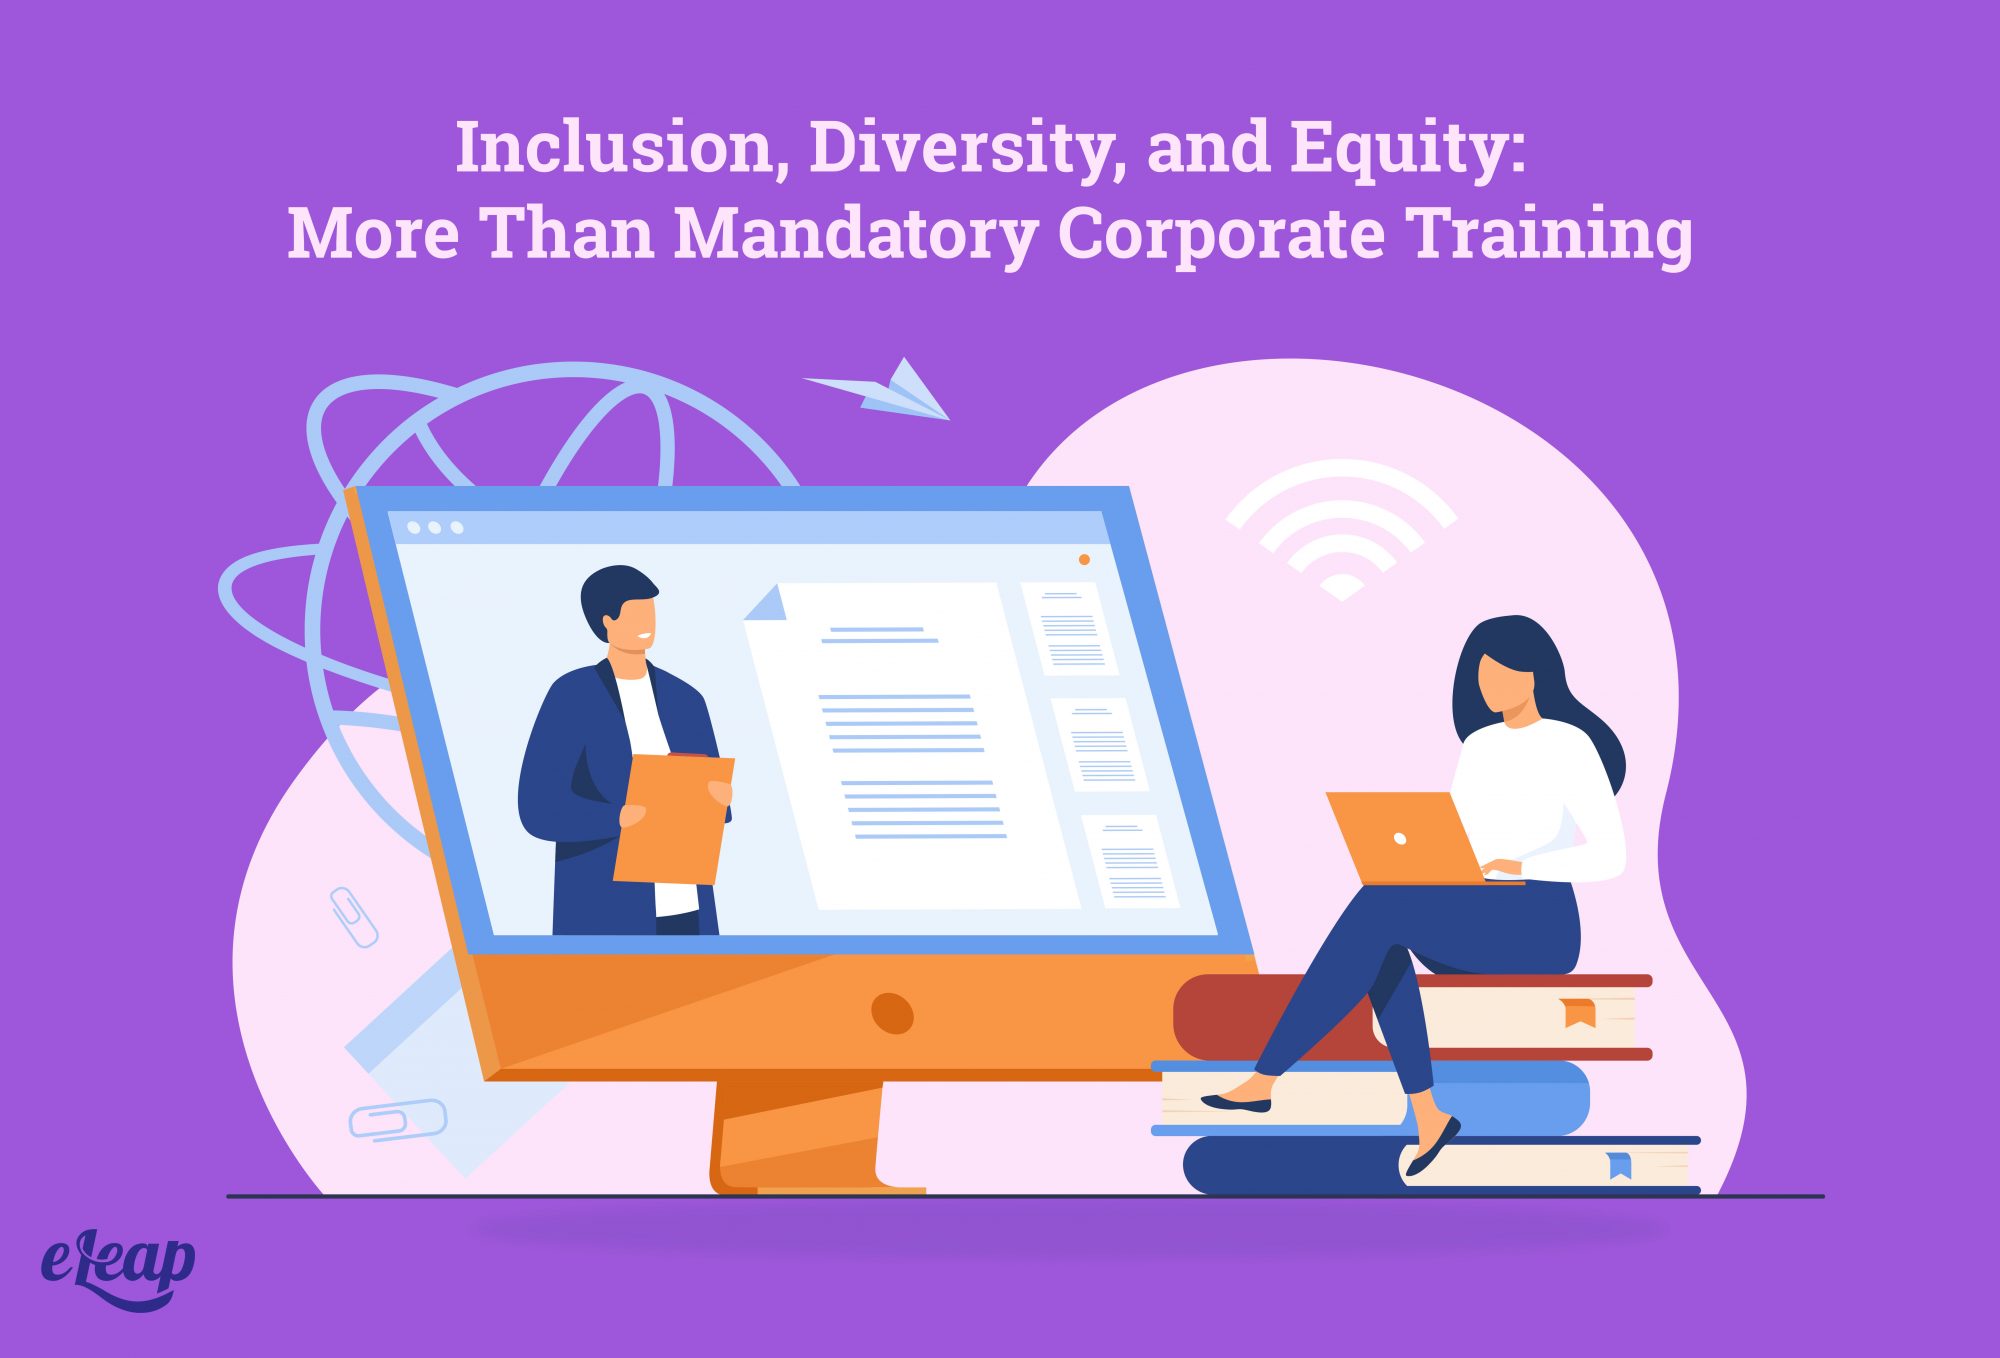 Inclusion, Diversity, and Equity: More Than Mandatory Corporate Training